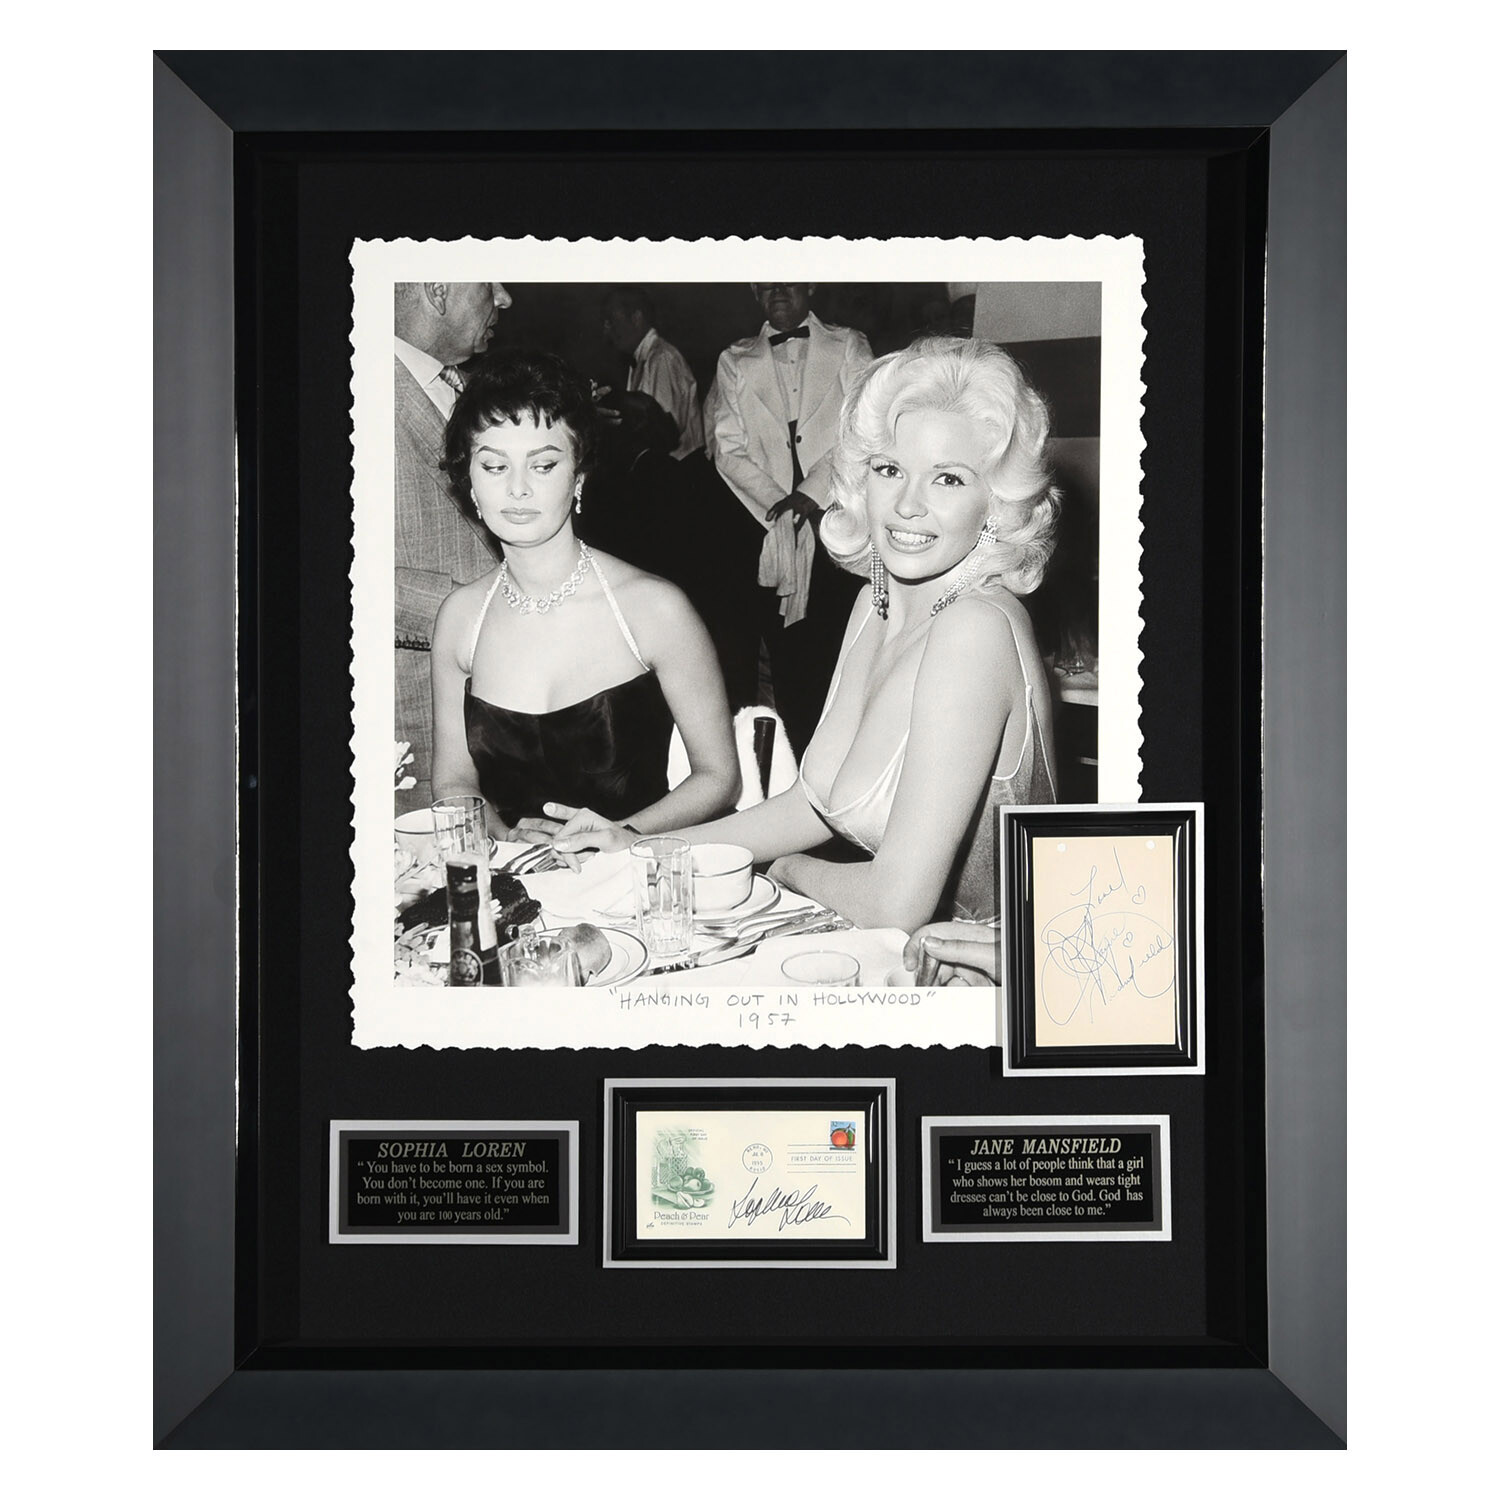 Sophia Loren Jayne Mansfield Hanging Out In Hollywood Autographed Display Millionaire